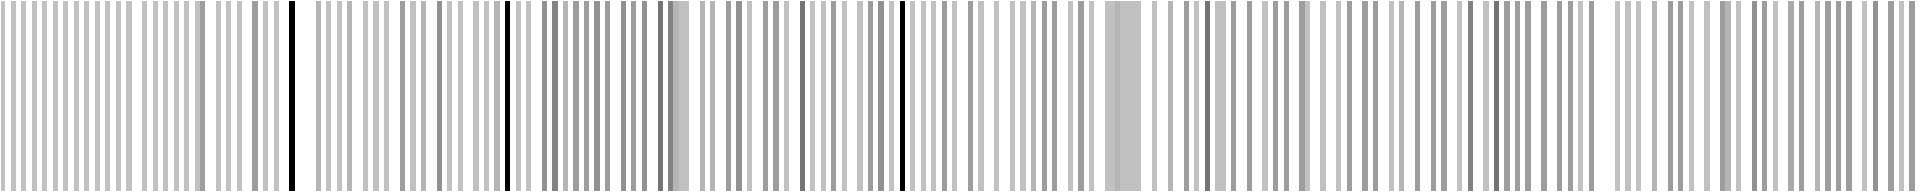 A one-dimensional plot of days represented by vertical lines, with run distance coloured on a scale of white to black.